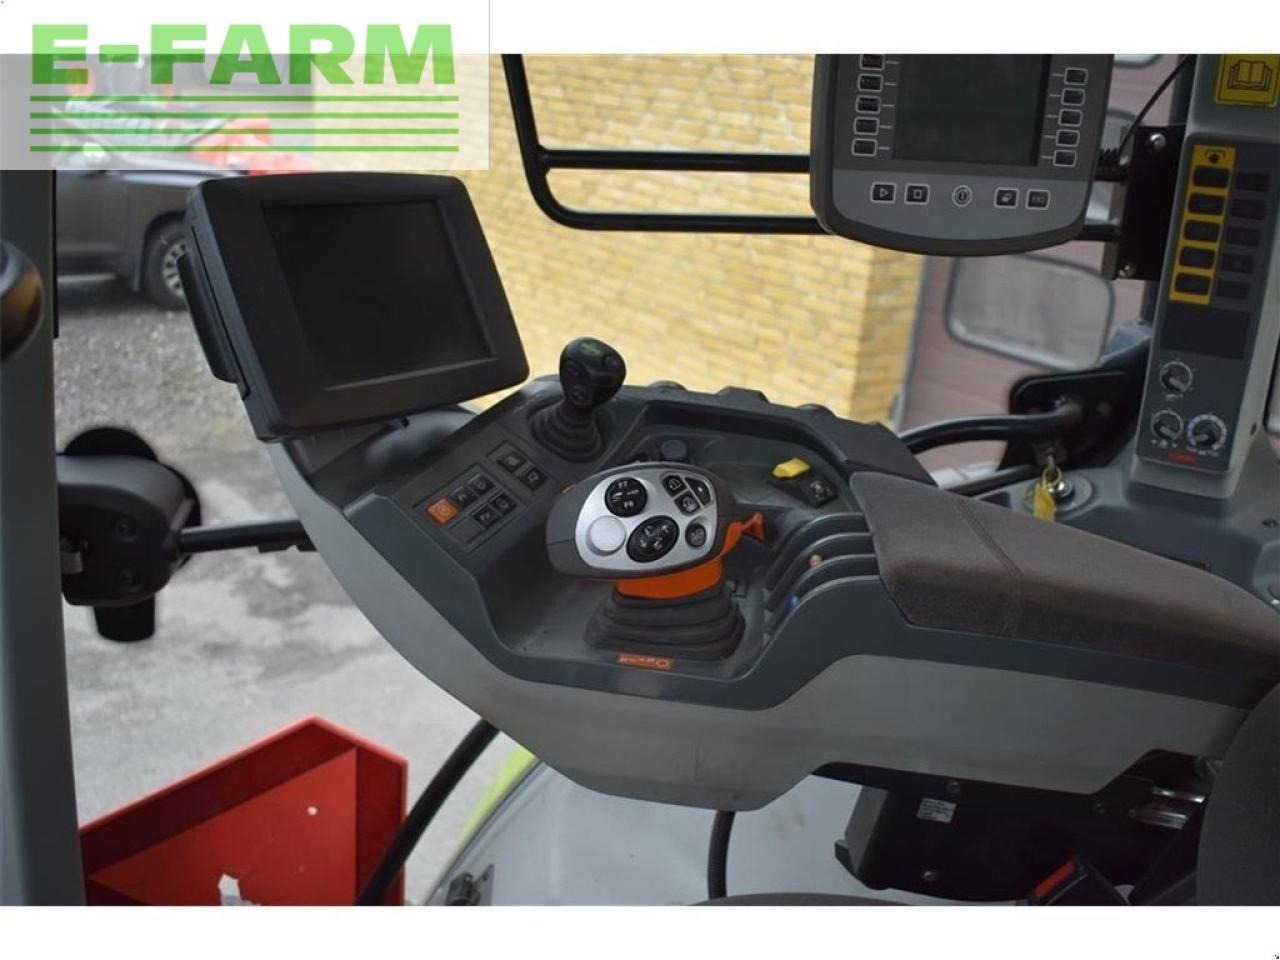 Farm tractor CLAAS arion 650 cebis: picture 5